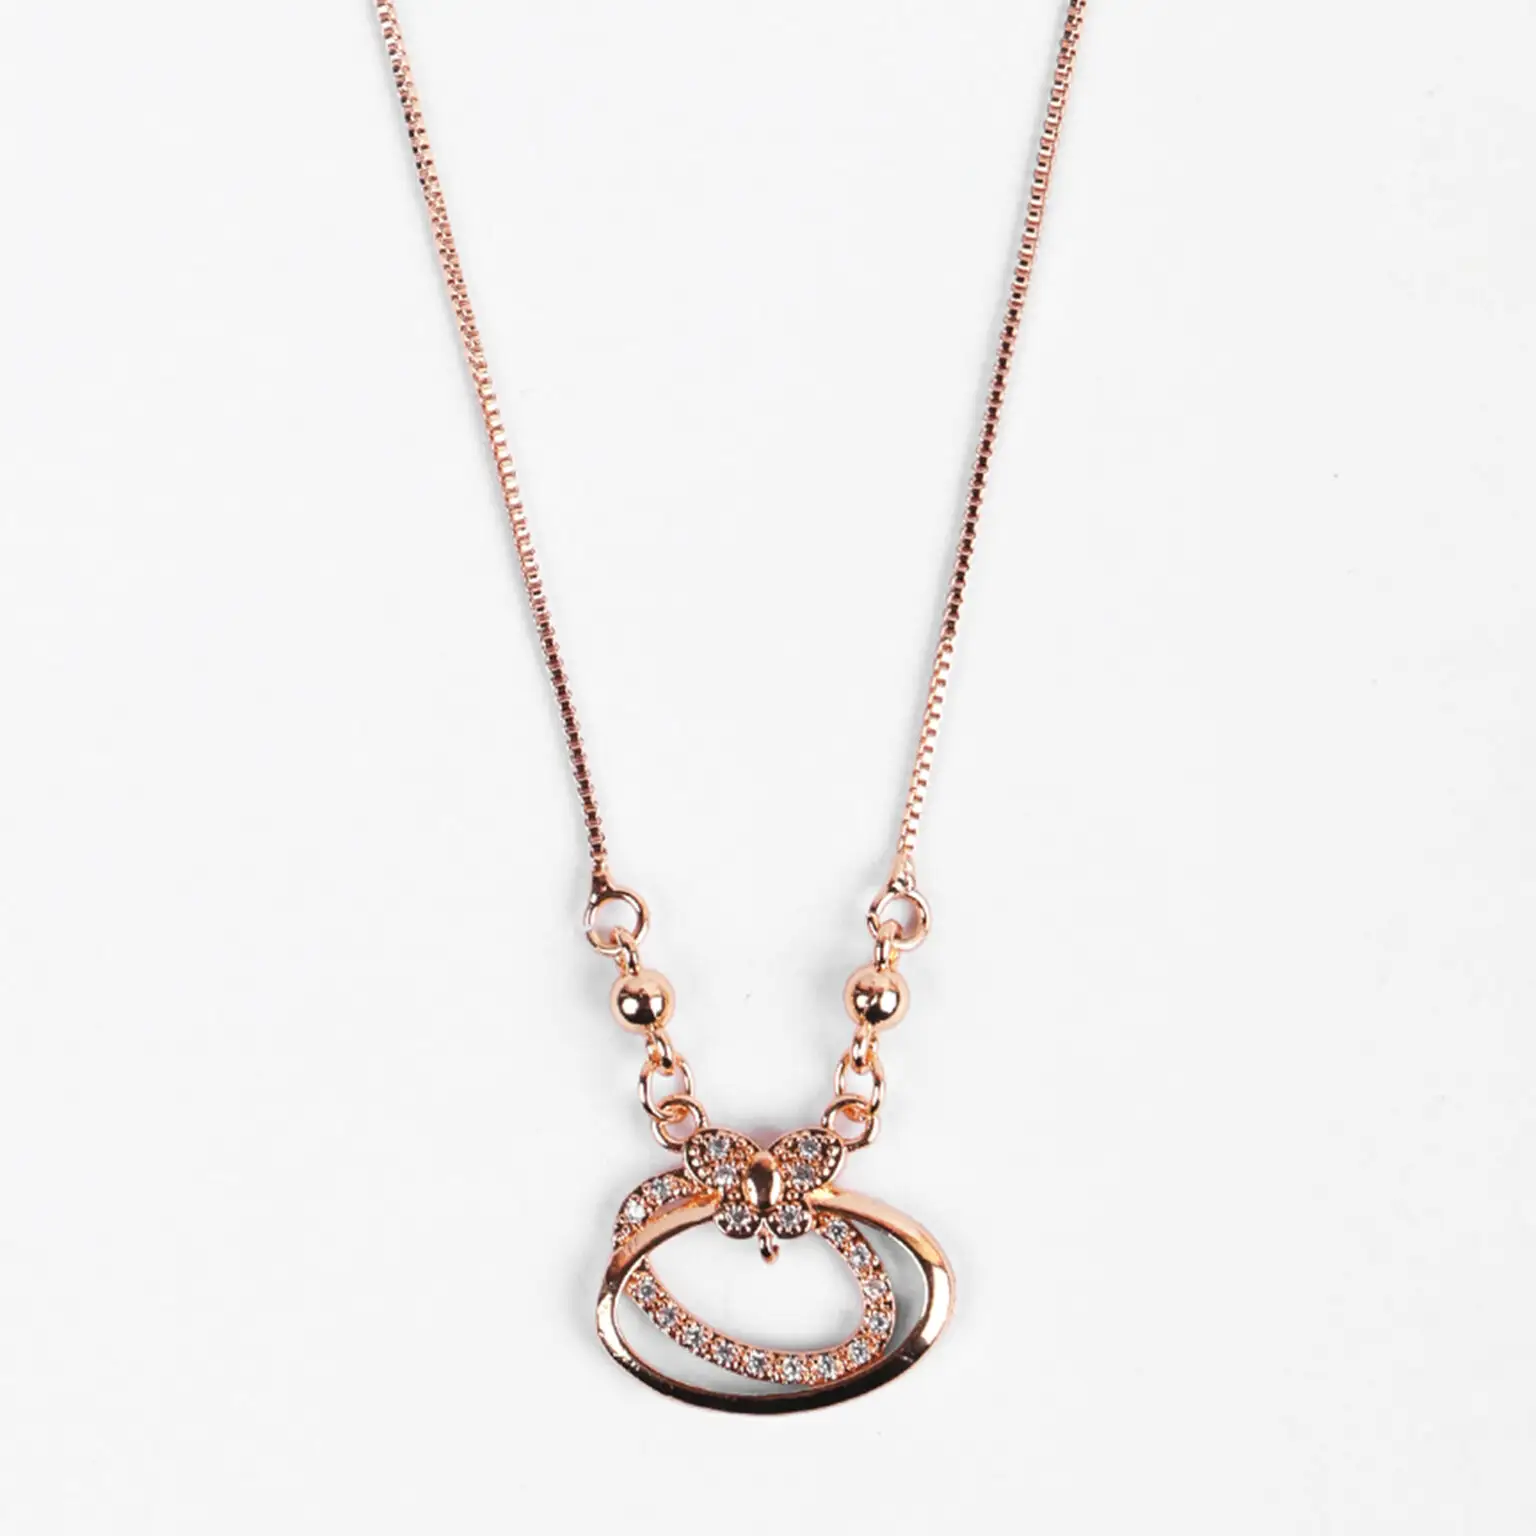 Indian Manufacturer Stainless Steel Charm Korean design Oval Pendant Rose Gold Plated Fashion Jewelry Neckless For women's Gift